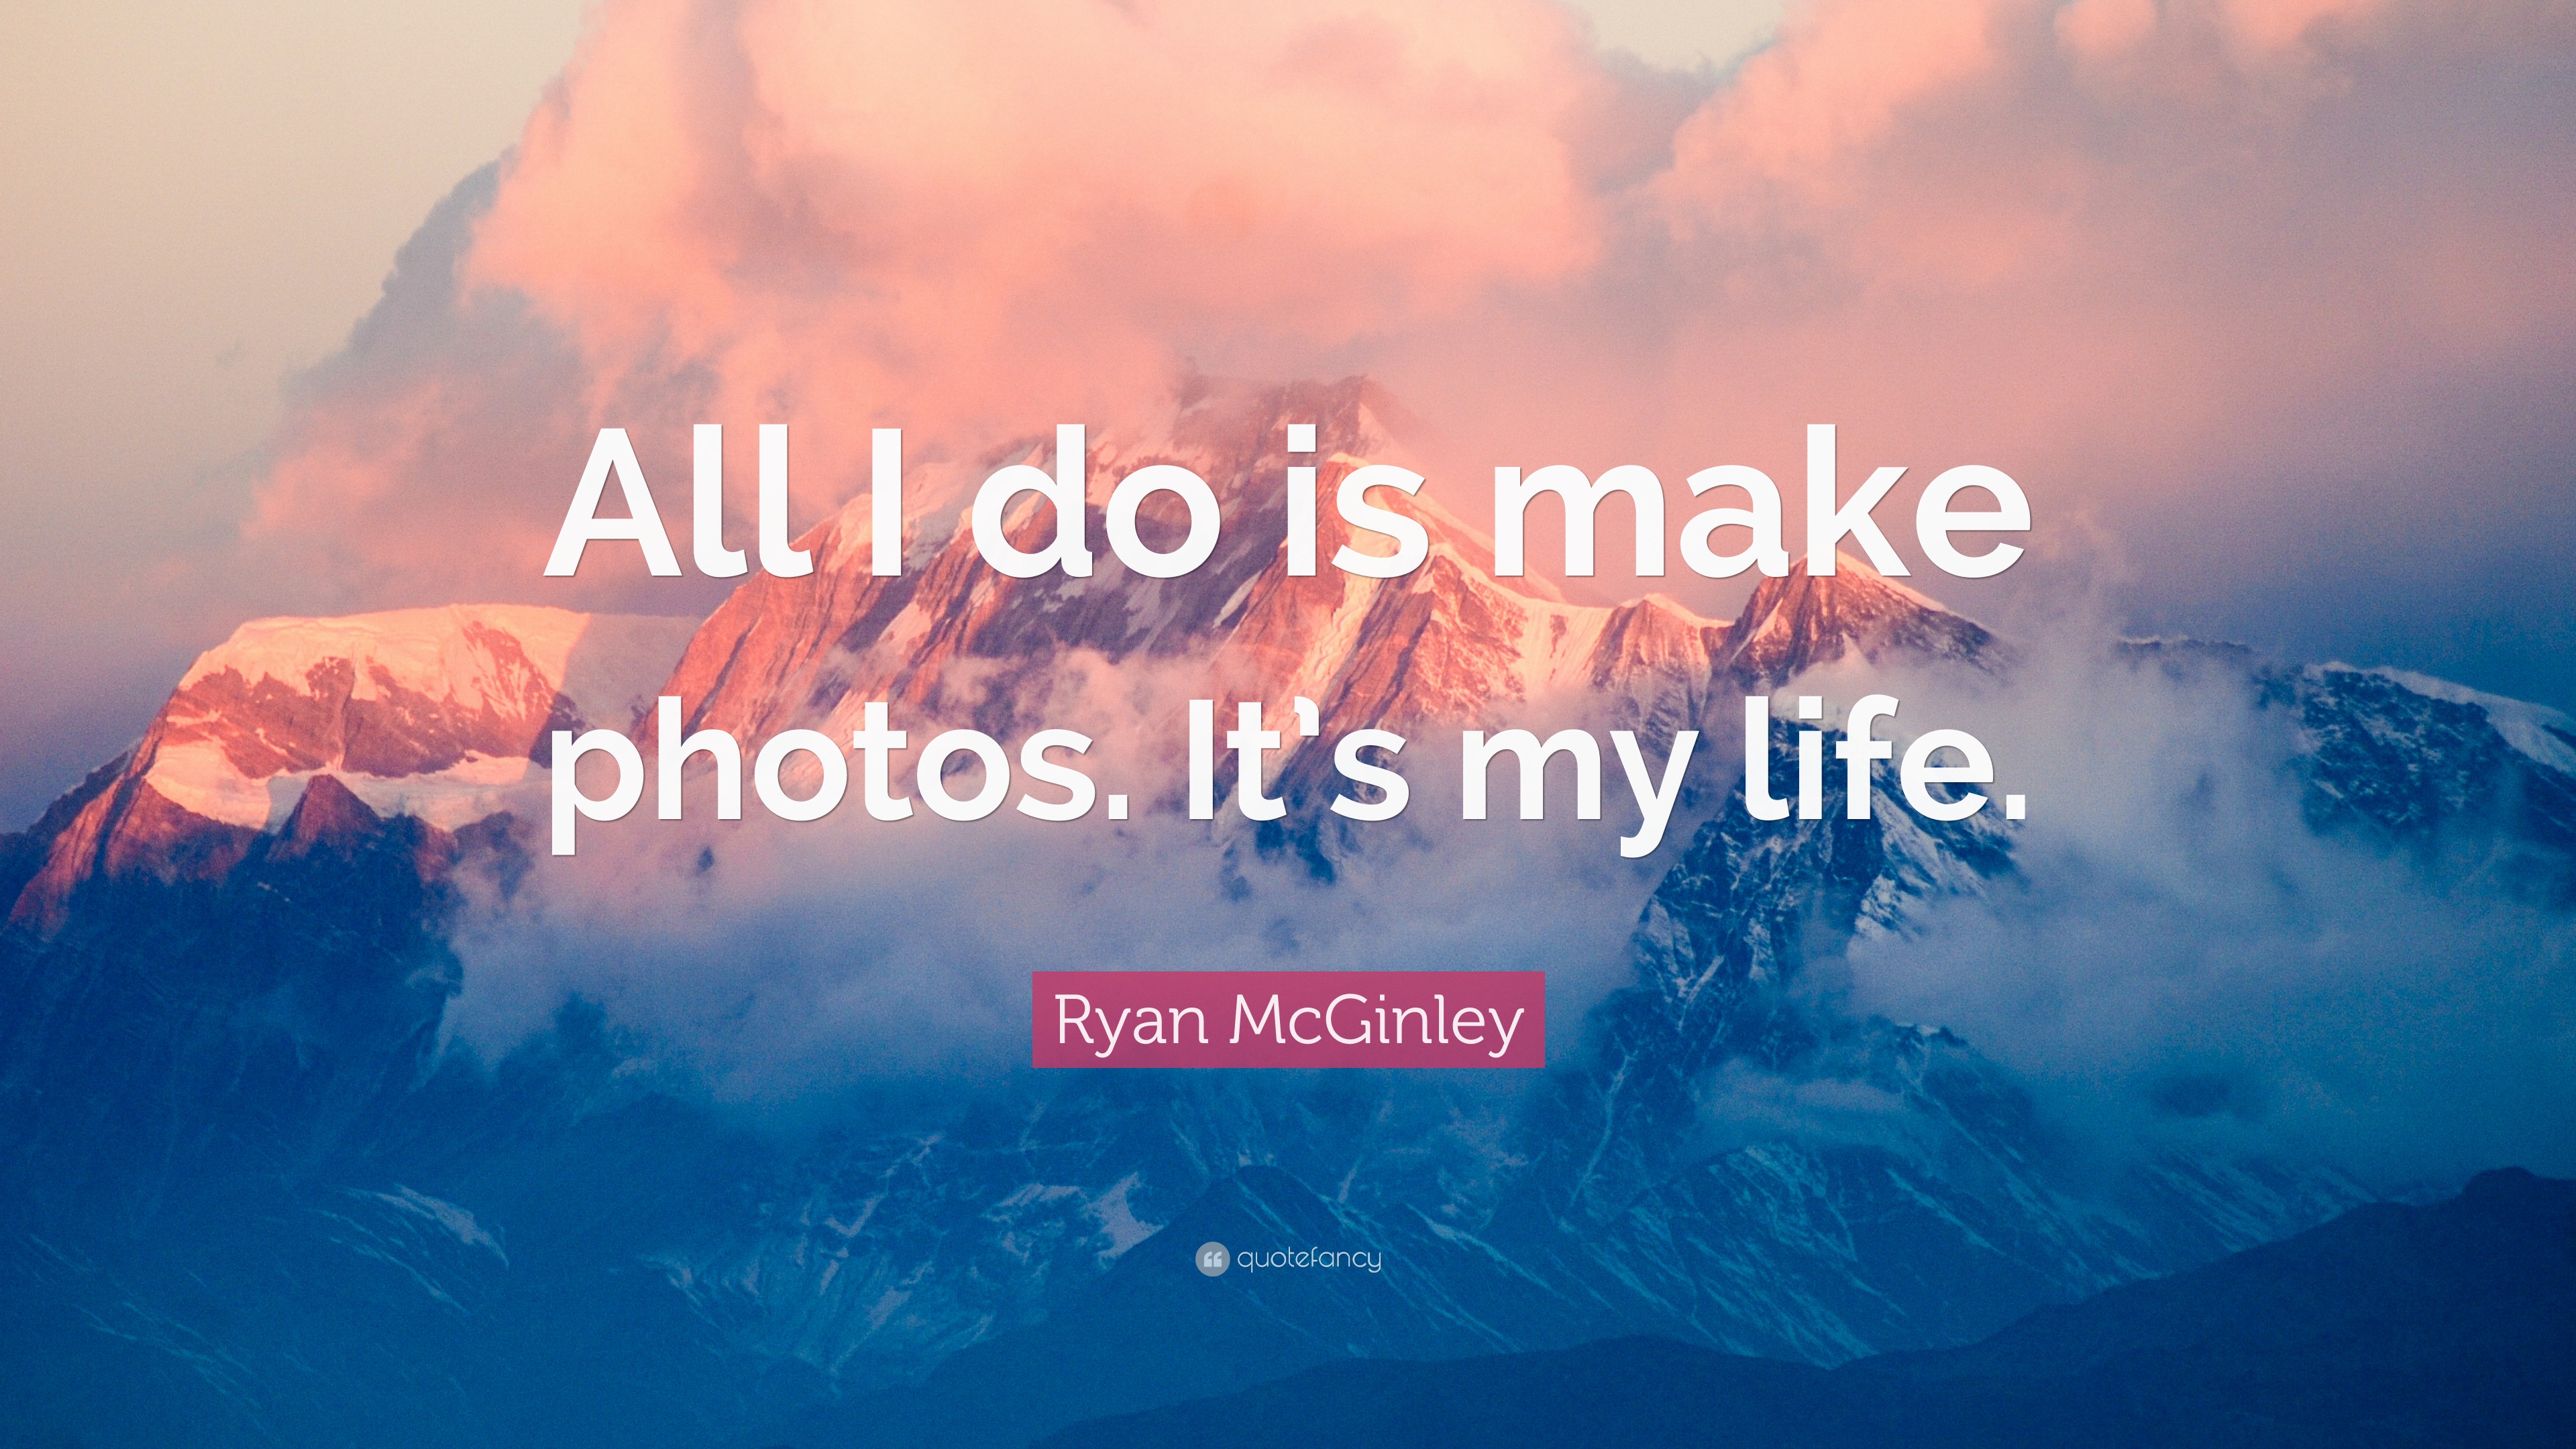 Ryan McGinley Quote: “All I do is make photos. It's my life.”